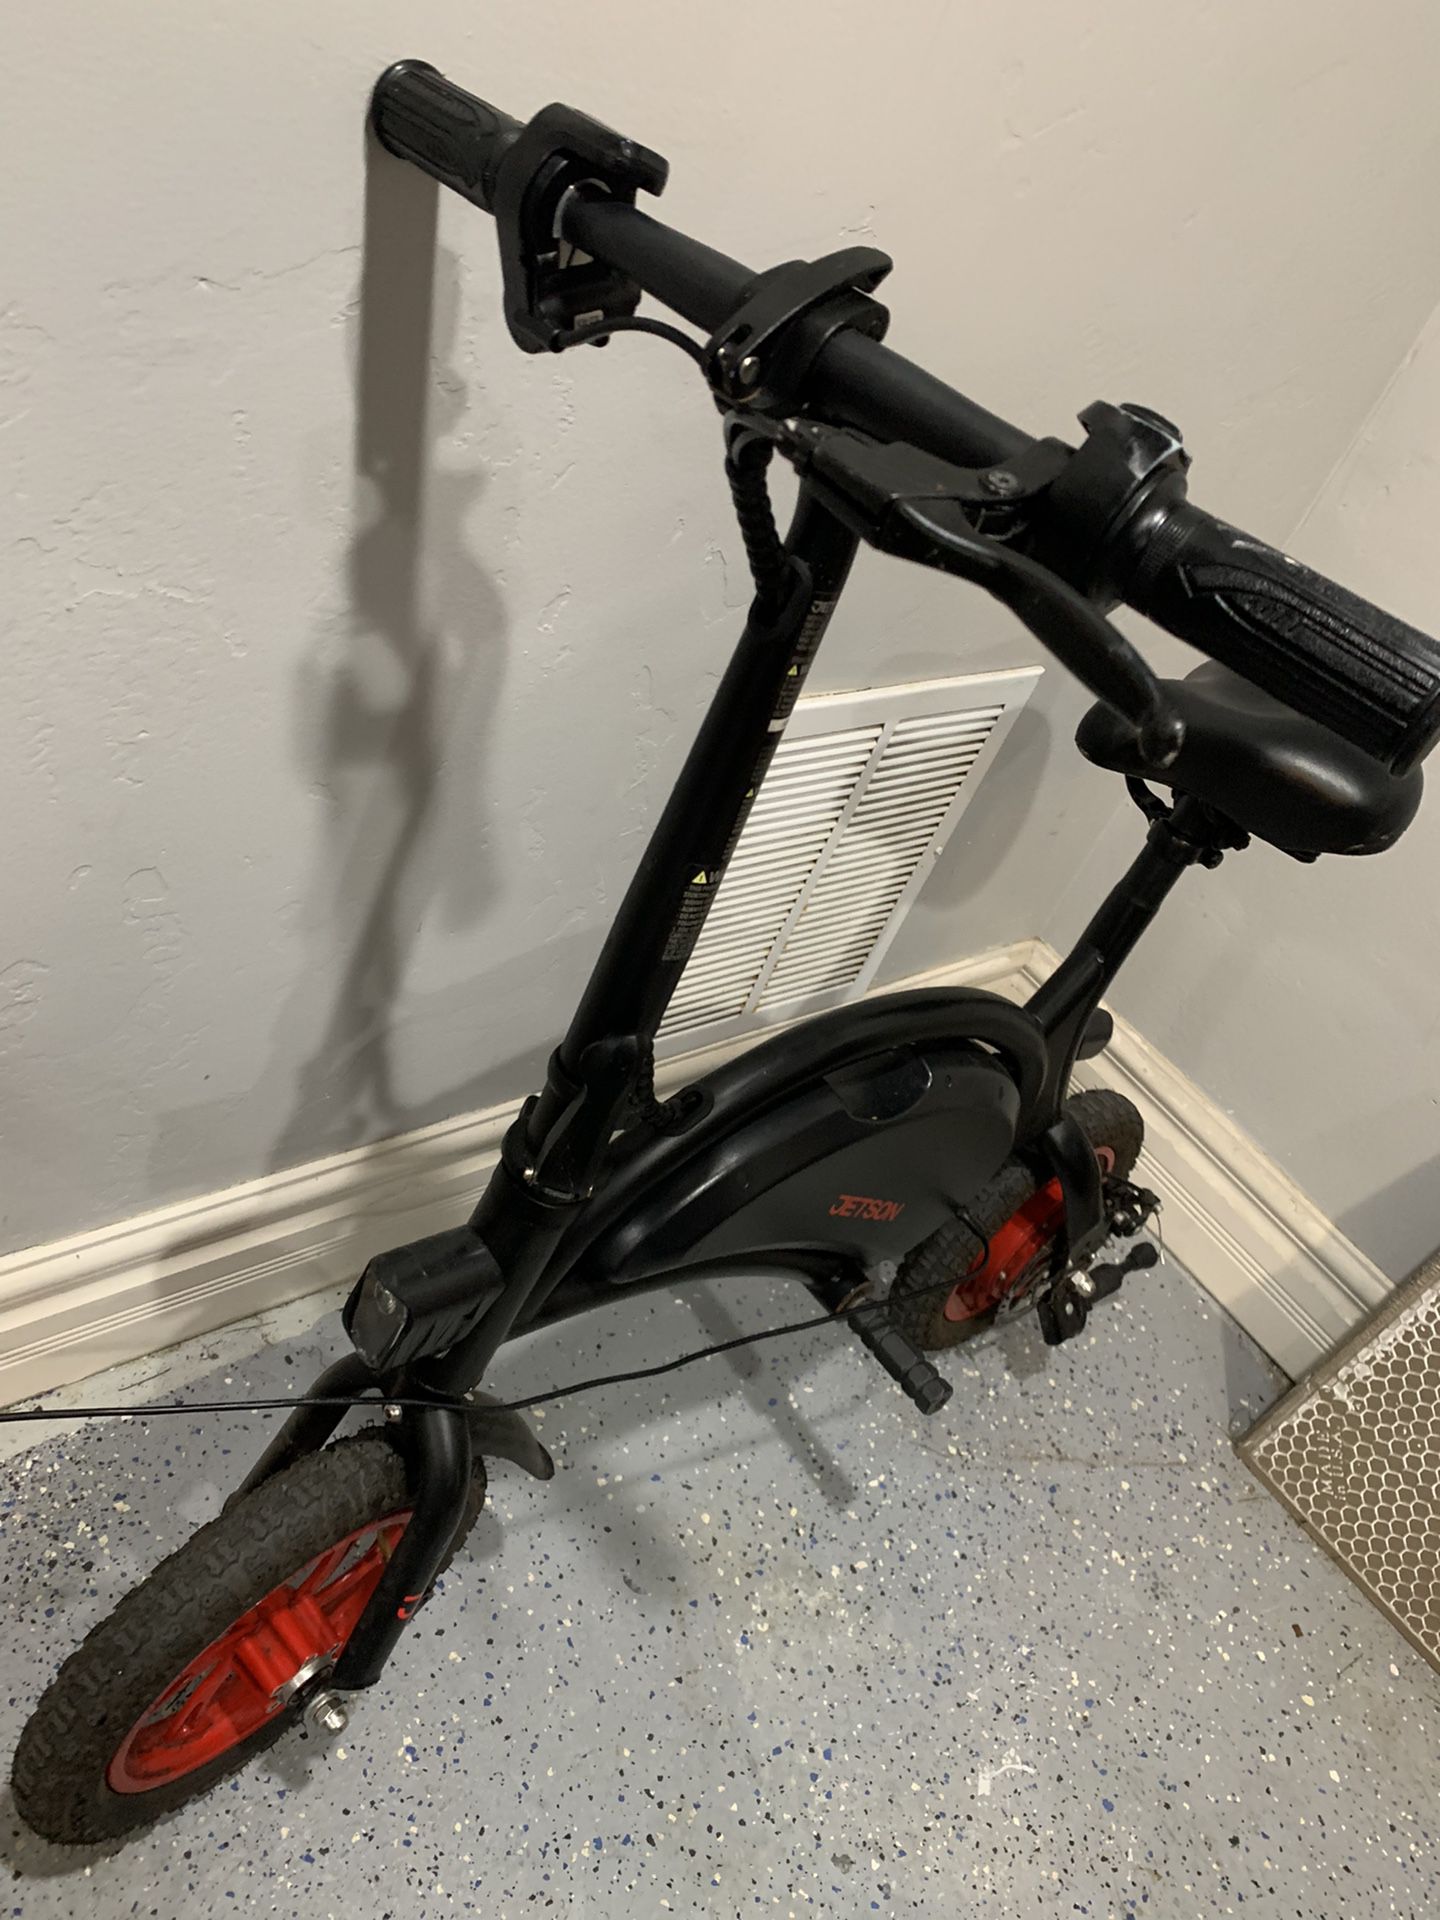 Jetson Jetsen Electric Bike . $175 Woth Charger Pickup Point Loma 